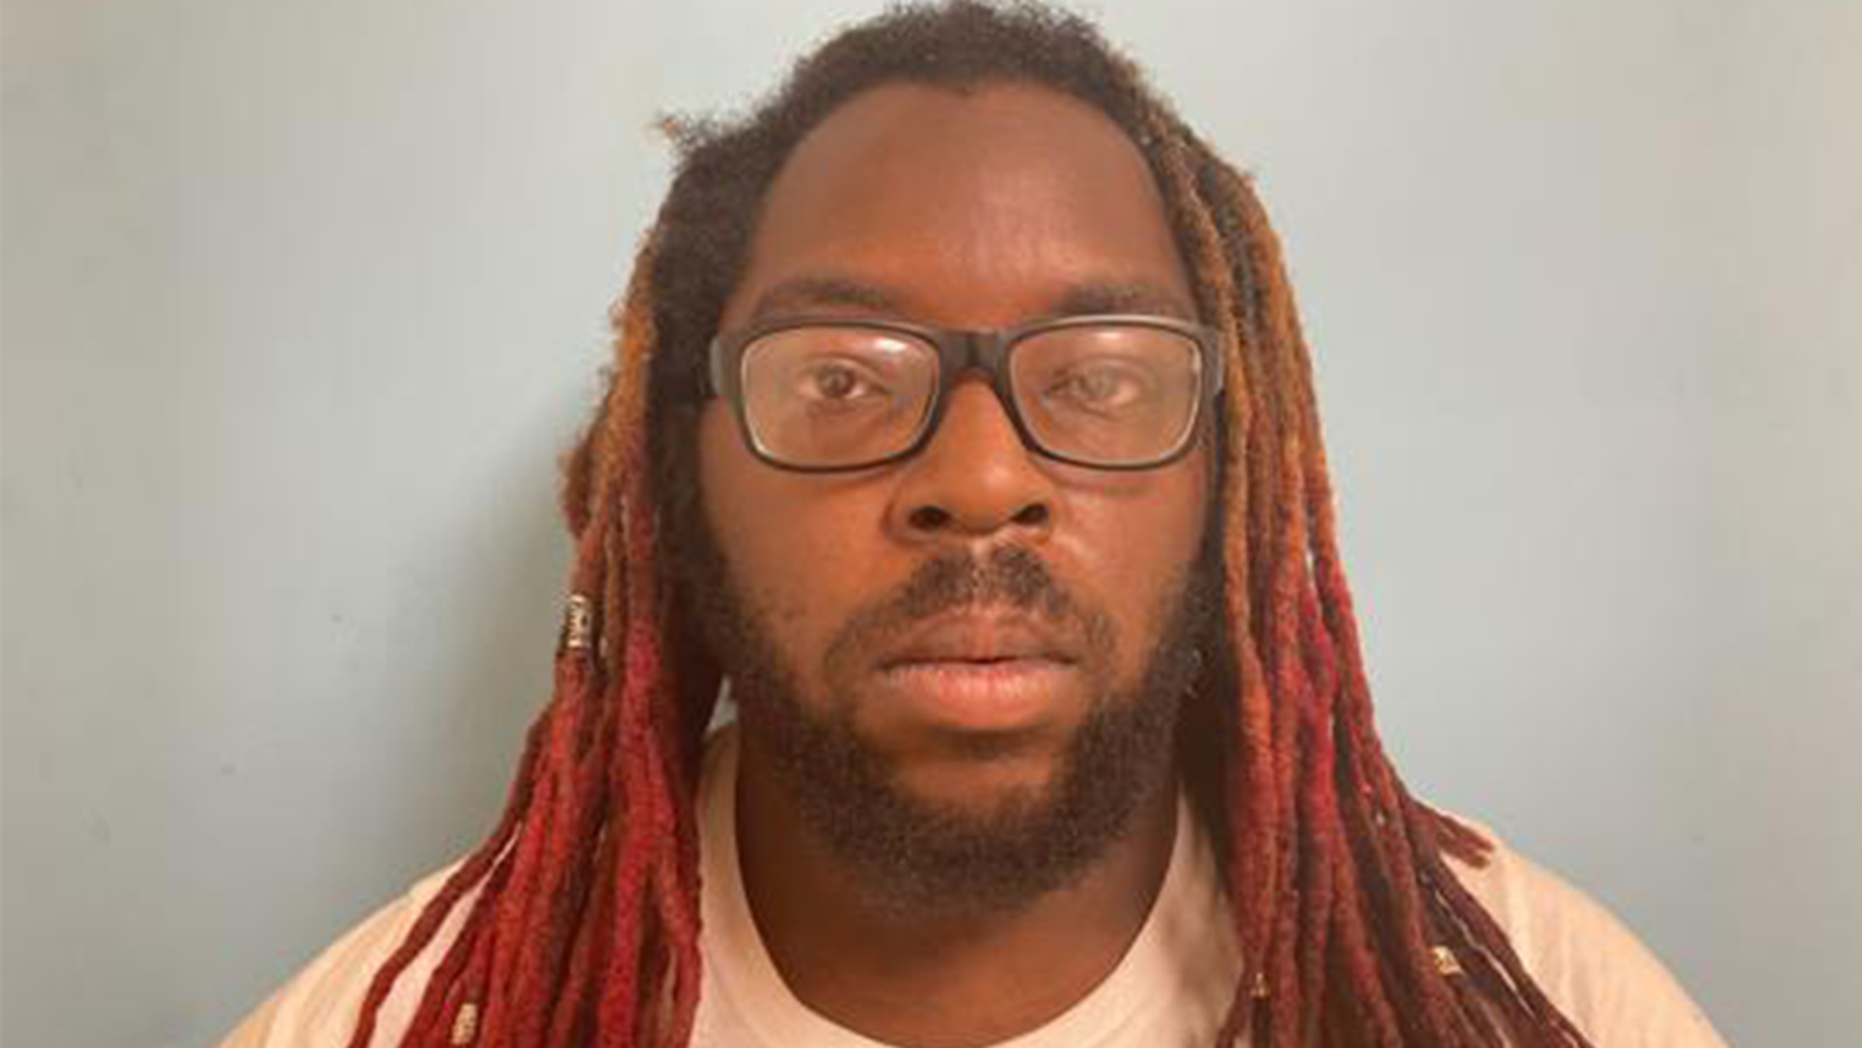 This 28-year-old man is arrested for giving a child a face tattoo at McDonald's